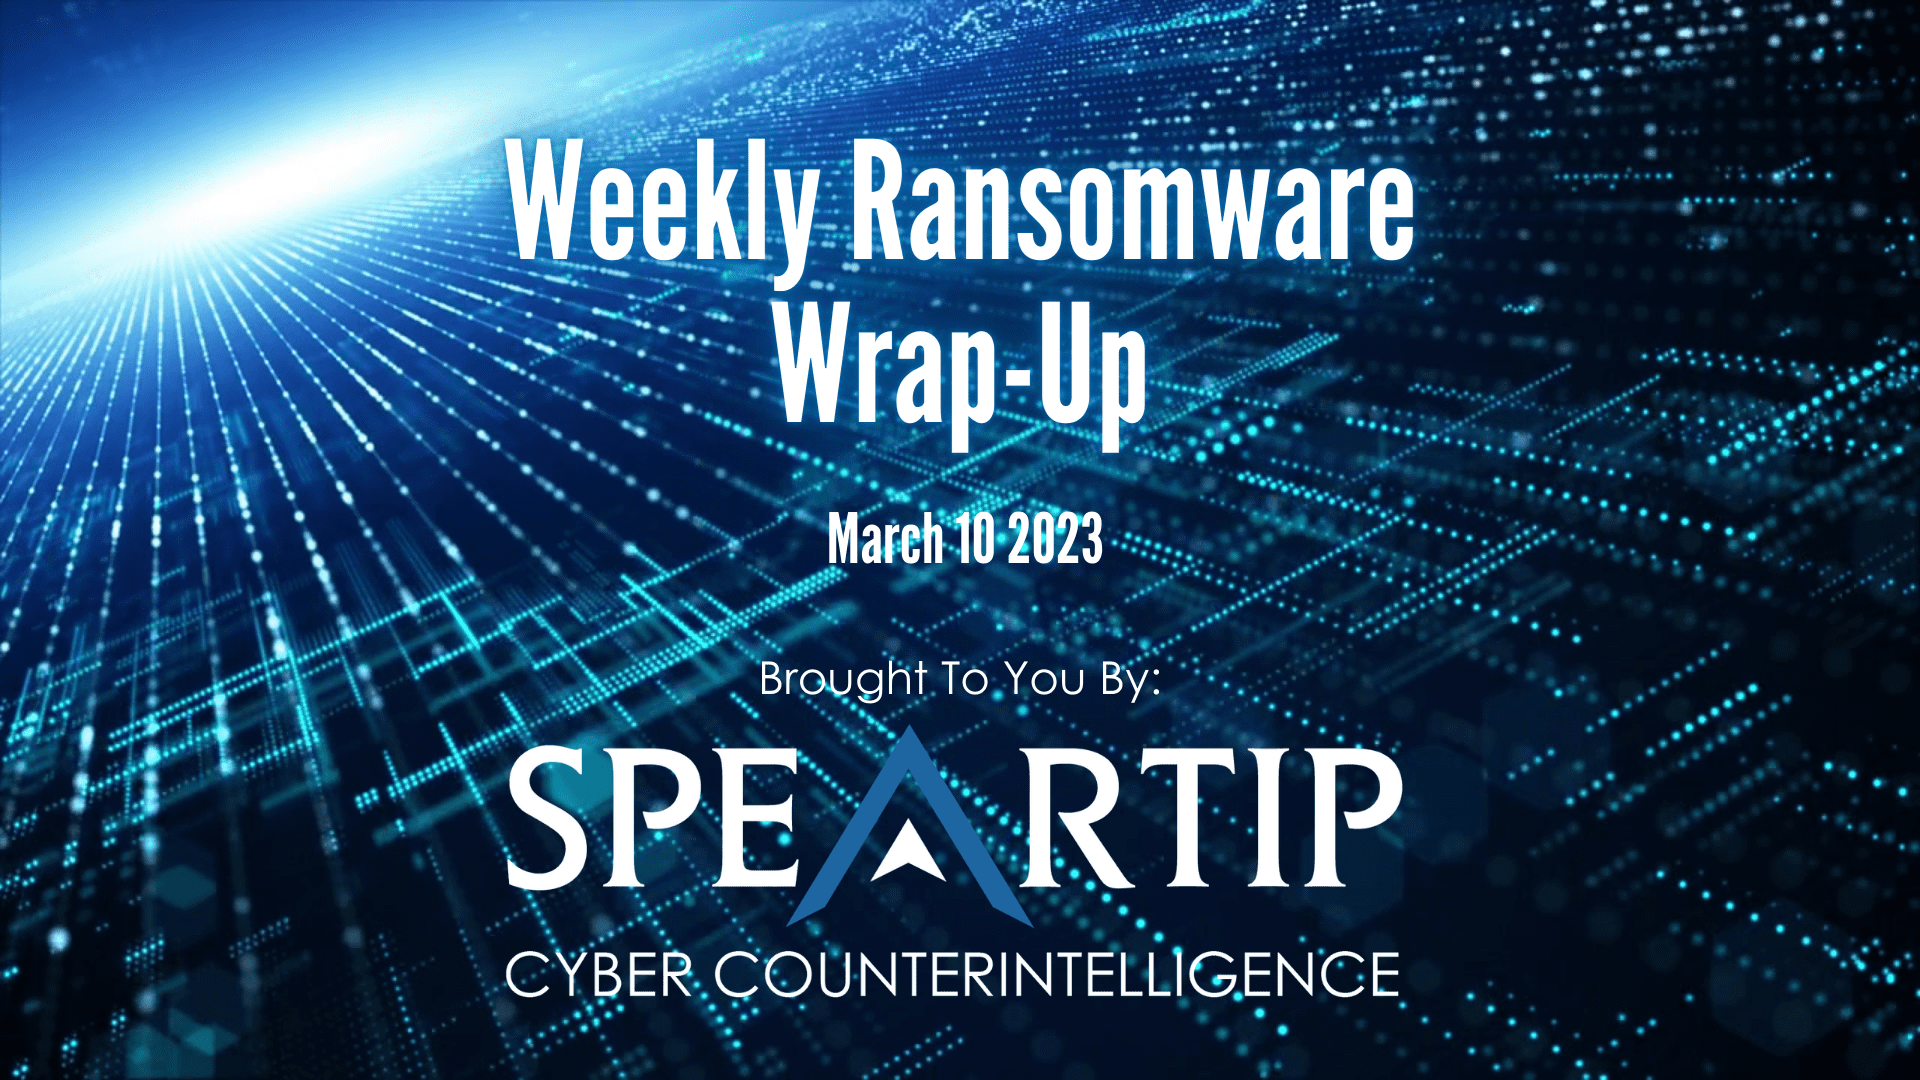 March 10, 2023 Ransomware Wrap-Up